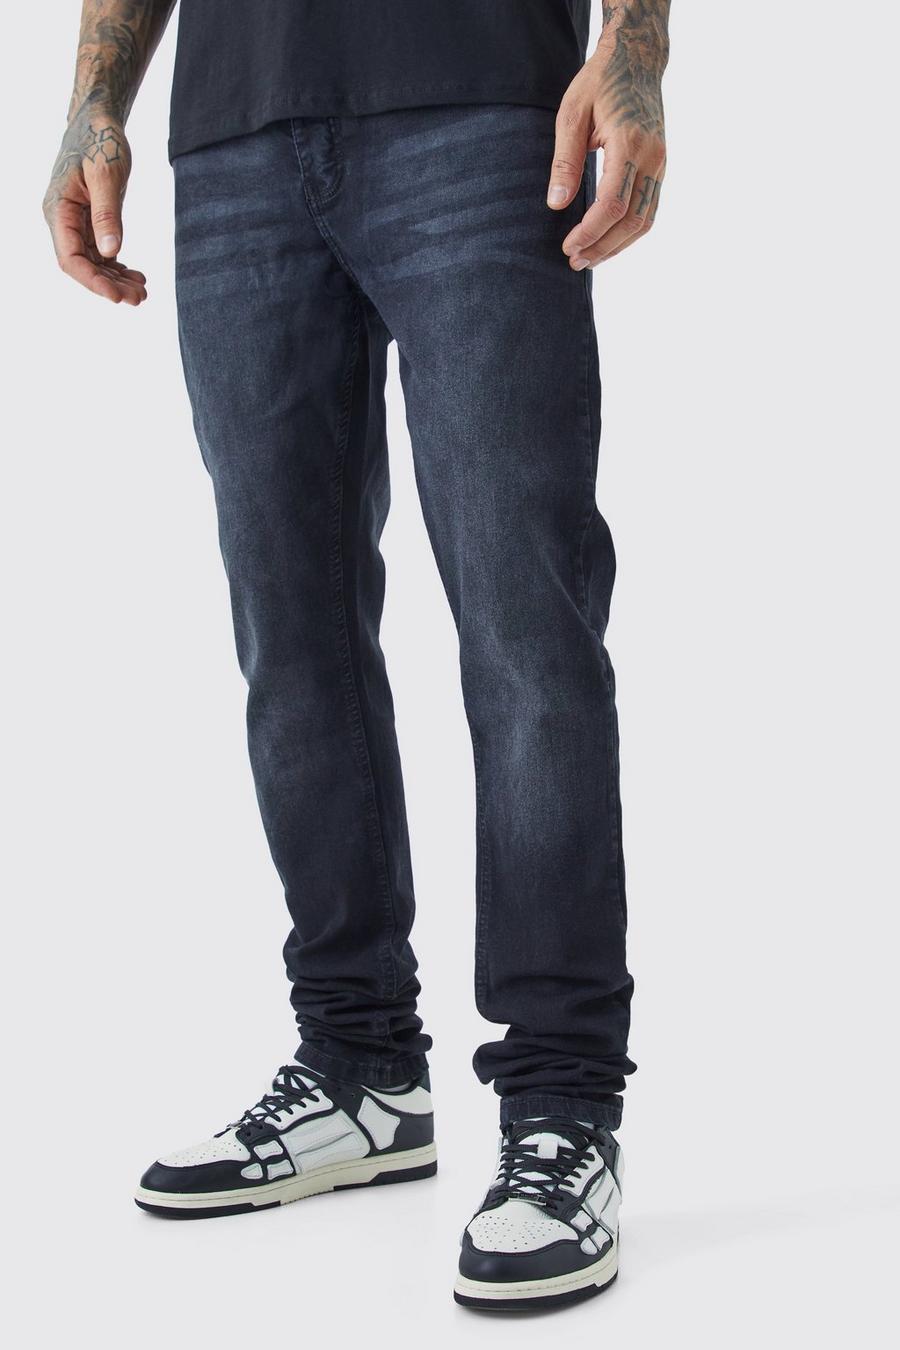 Washed black Tall Stacked Stretch Skinny Jeans